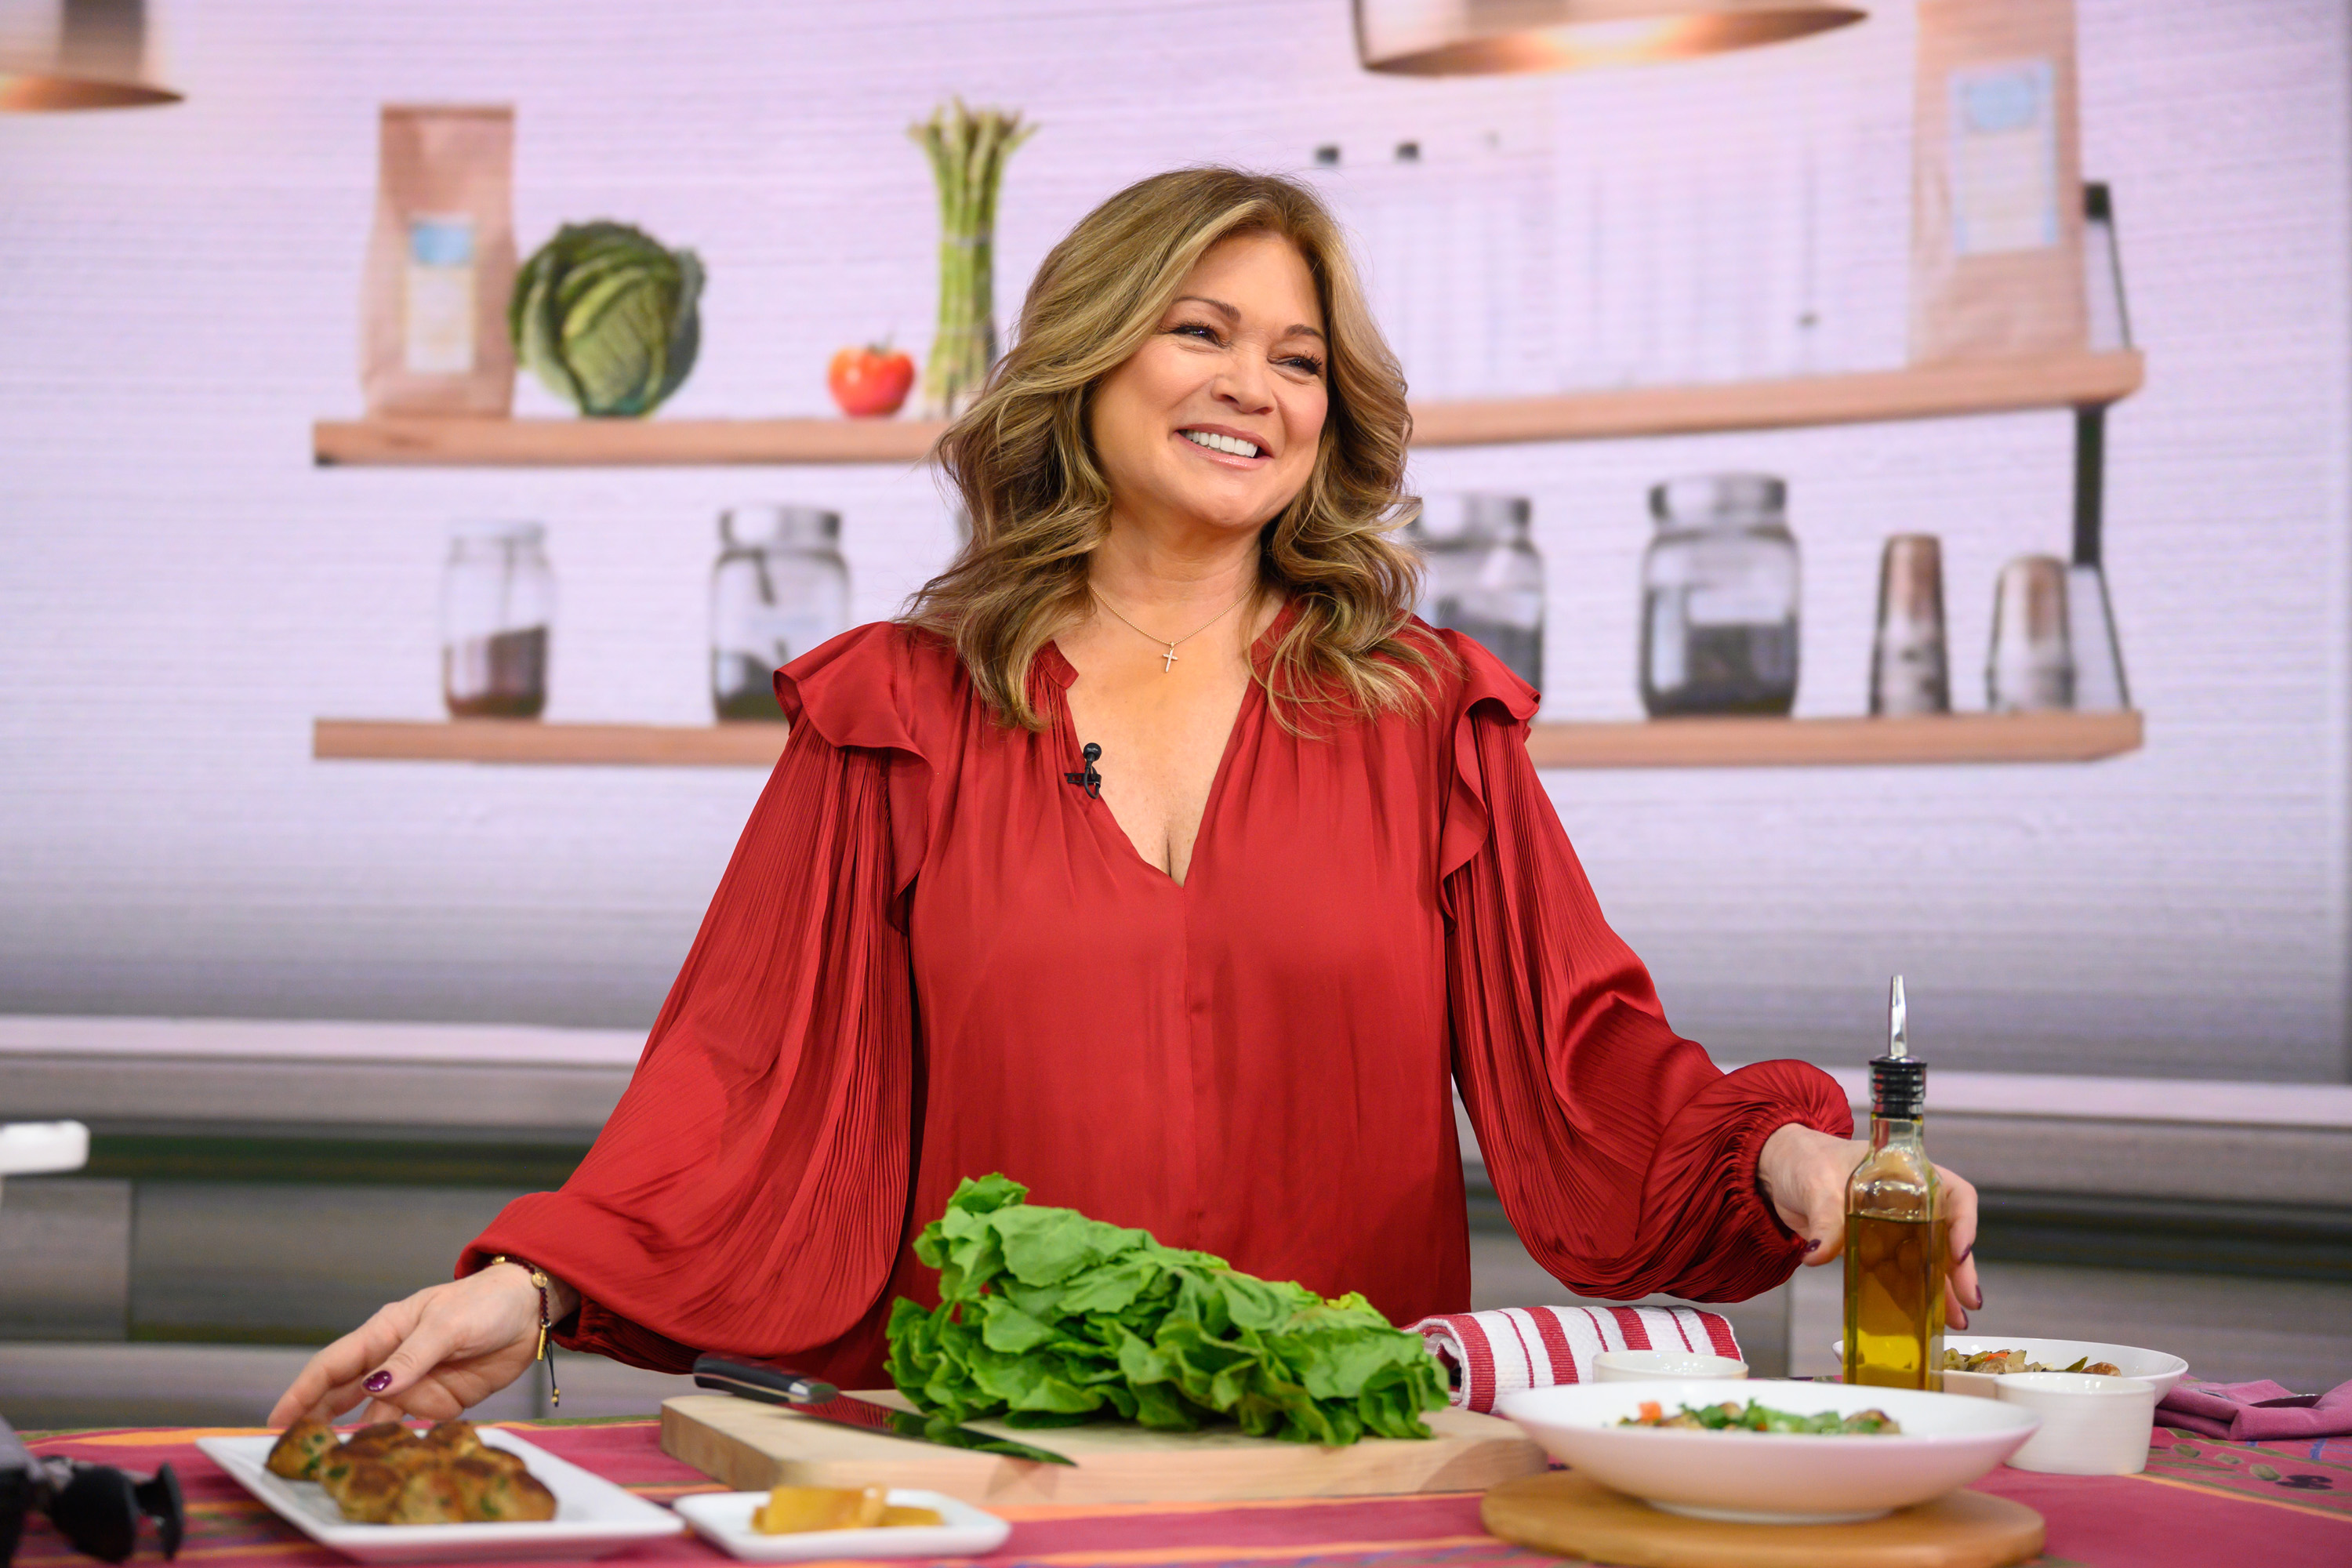 Actor Valerie Bertinelli, who has recently opened up about her weight, wears a long-sleeved red blouse while preparing salad.